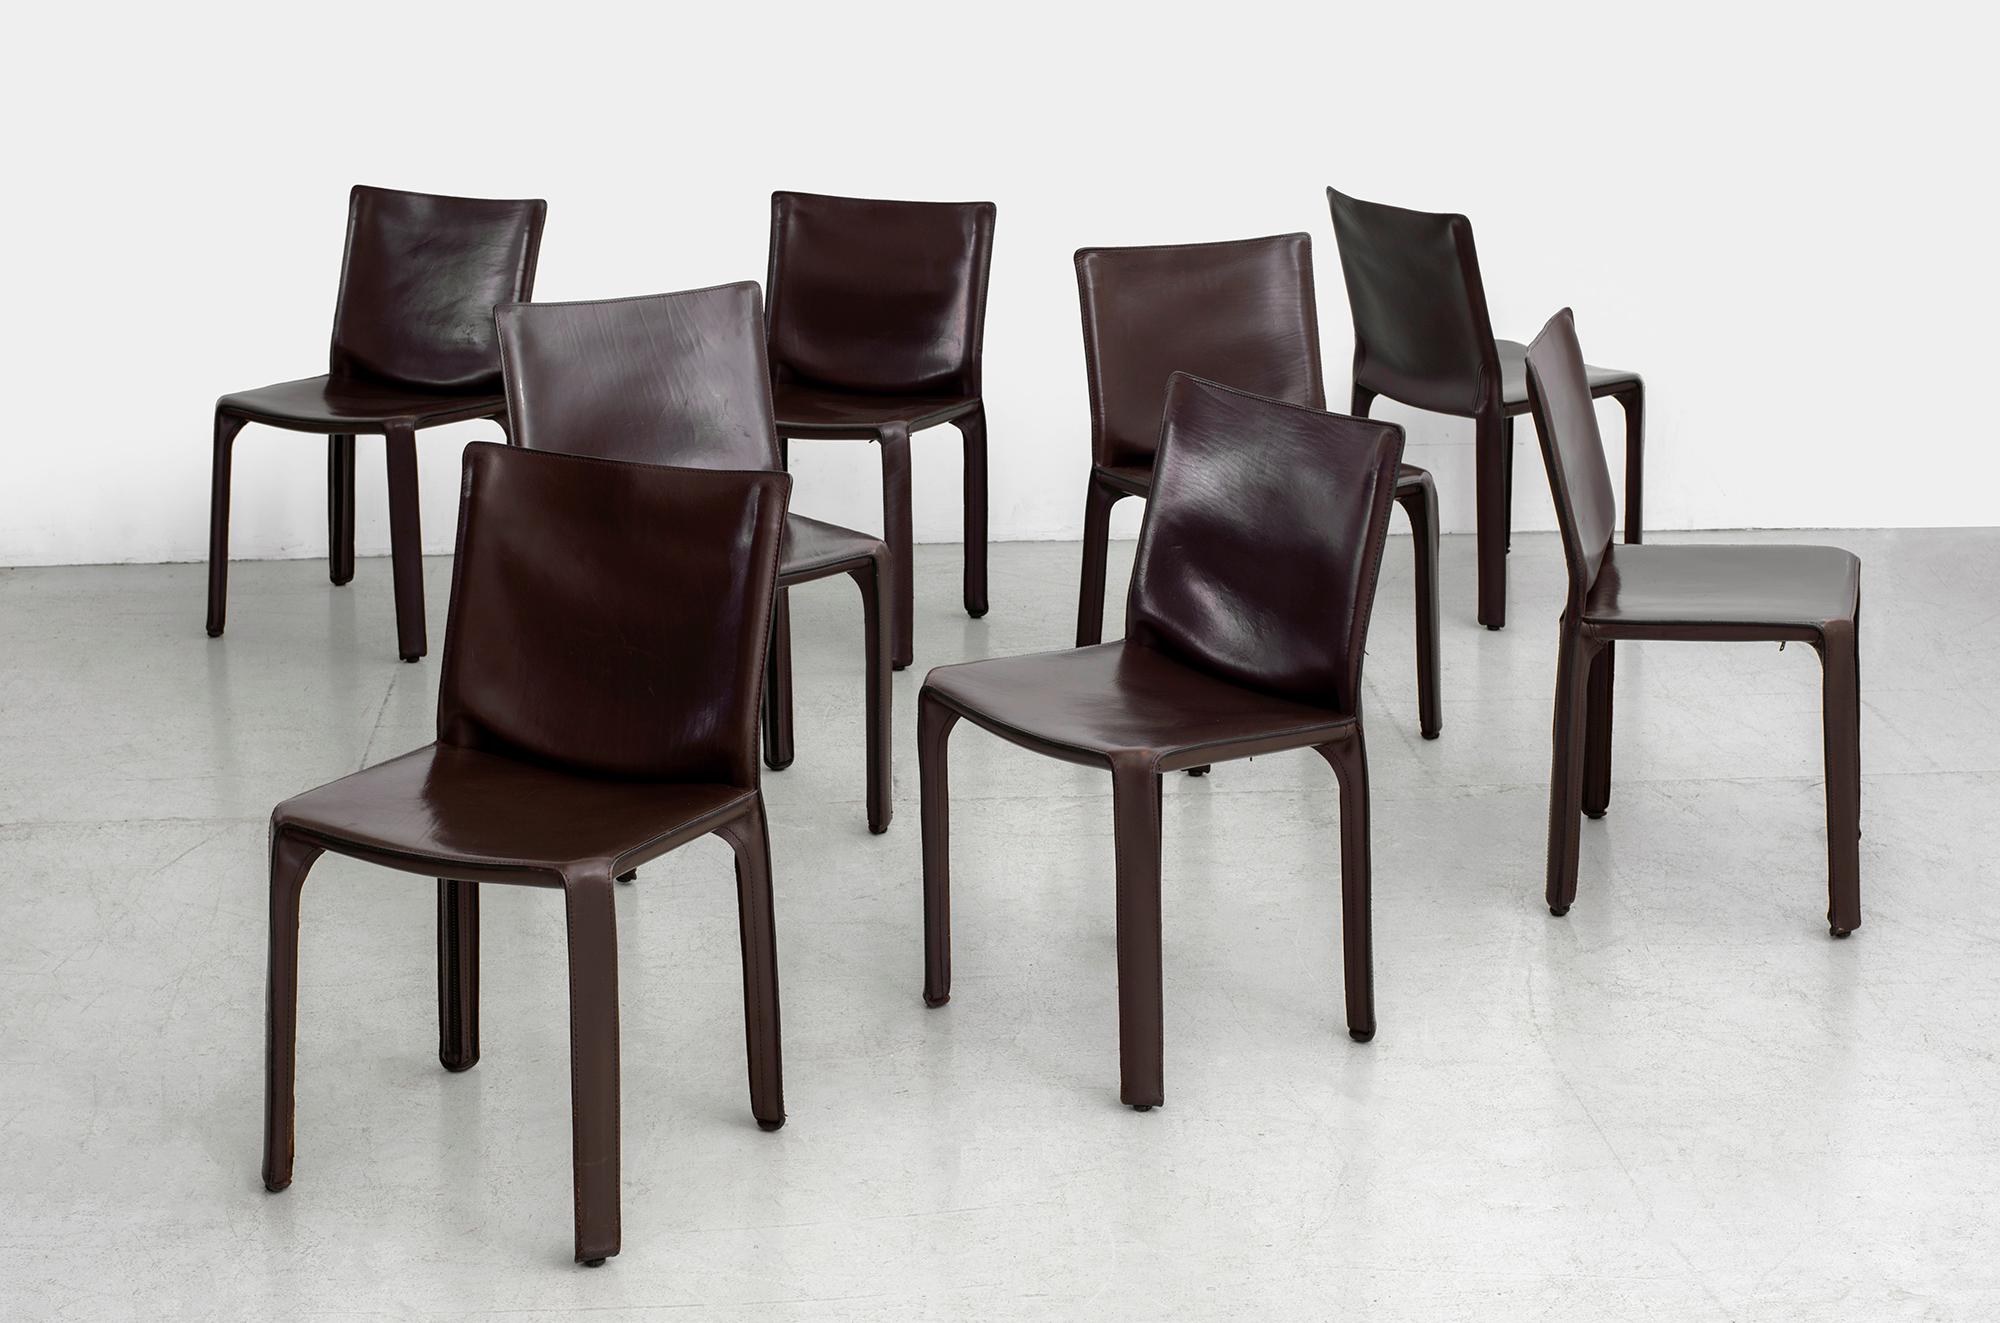 Classic leather Cab chairs by Mario Bellini for Cassina 
Wonderful chocolate brown leather - 
Excellent vintage condition.
Priced individually. 
Set of 8 available.